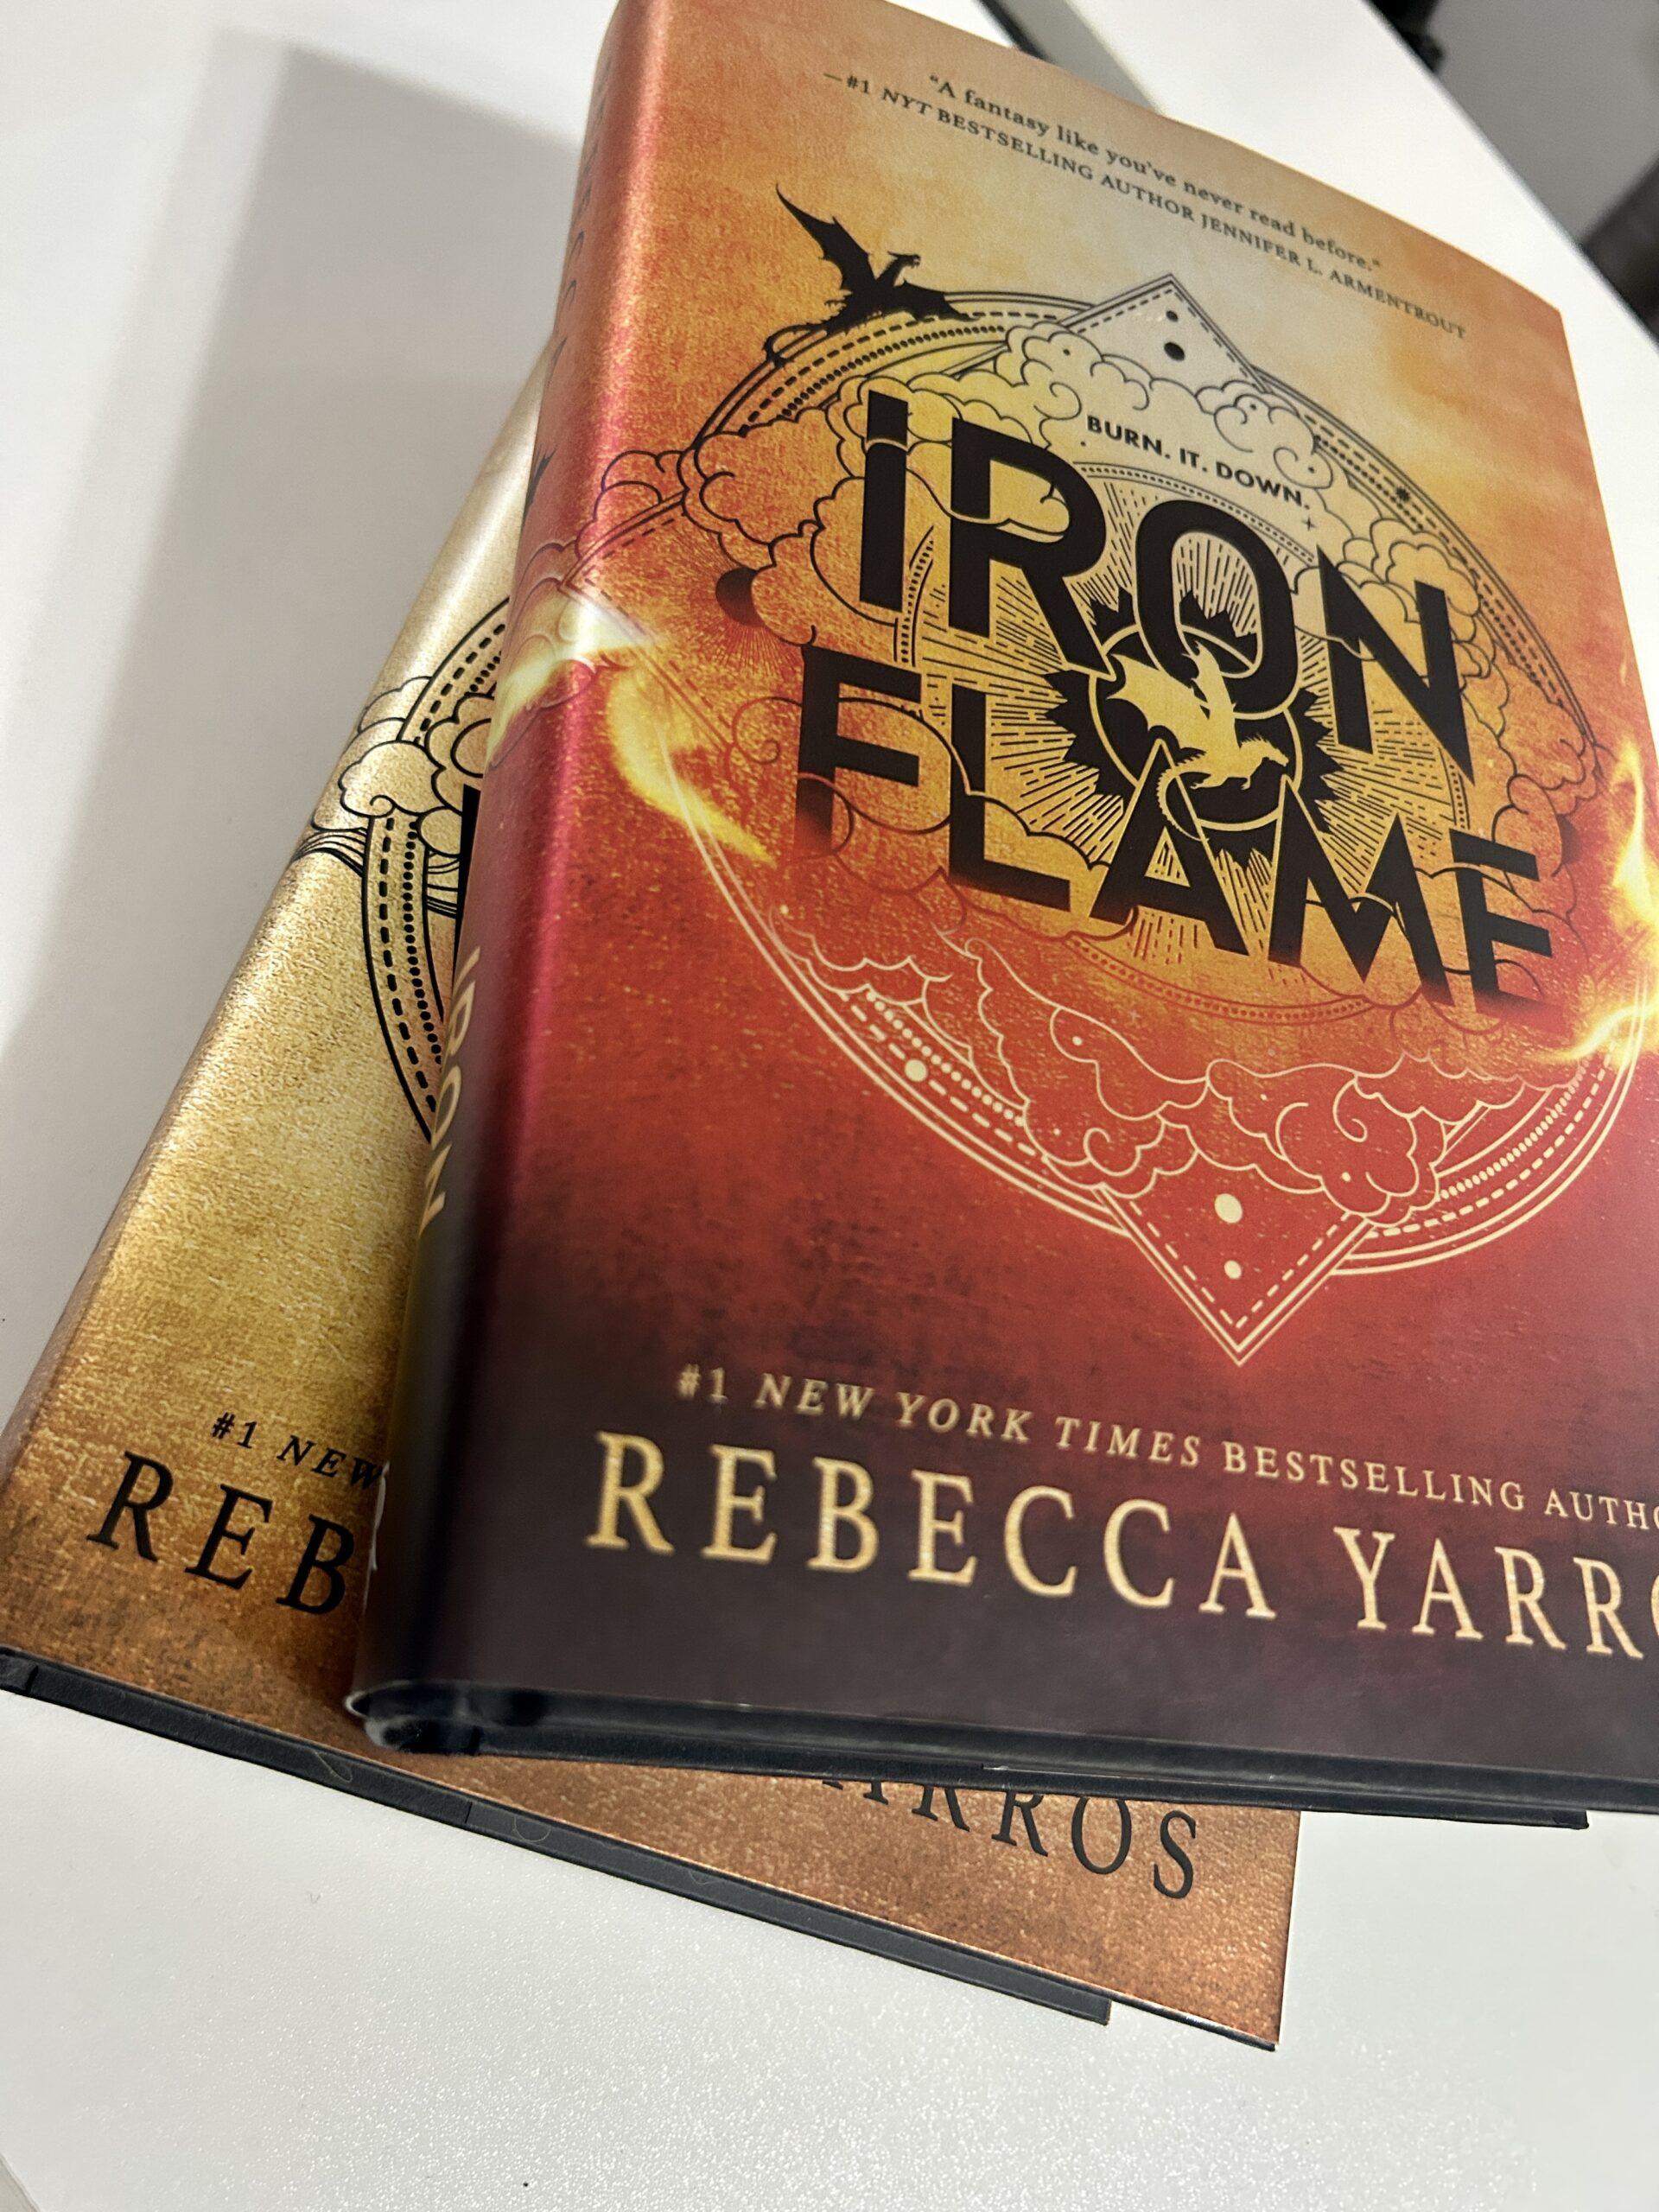 Iron Flame Ending Explained, Release Date, Characters, Plot, and